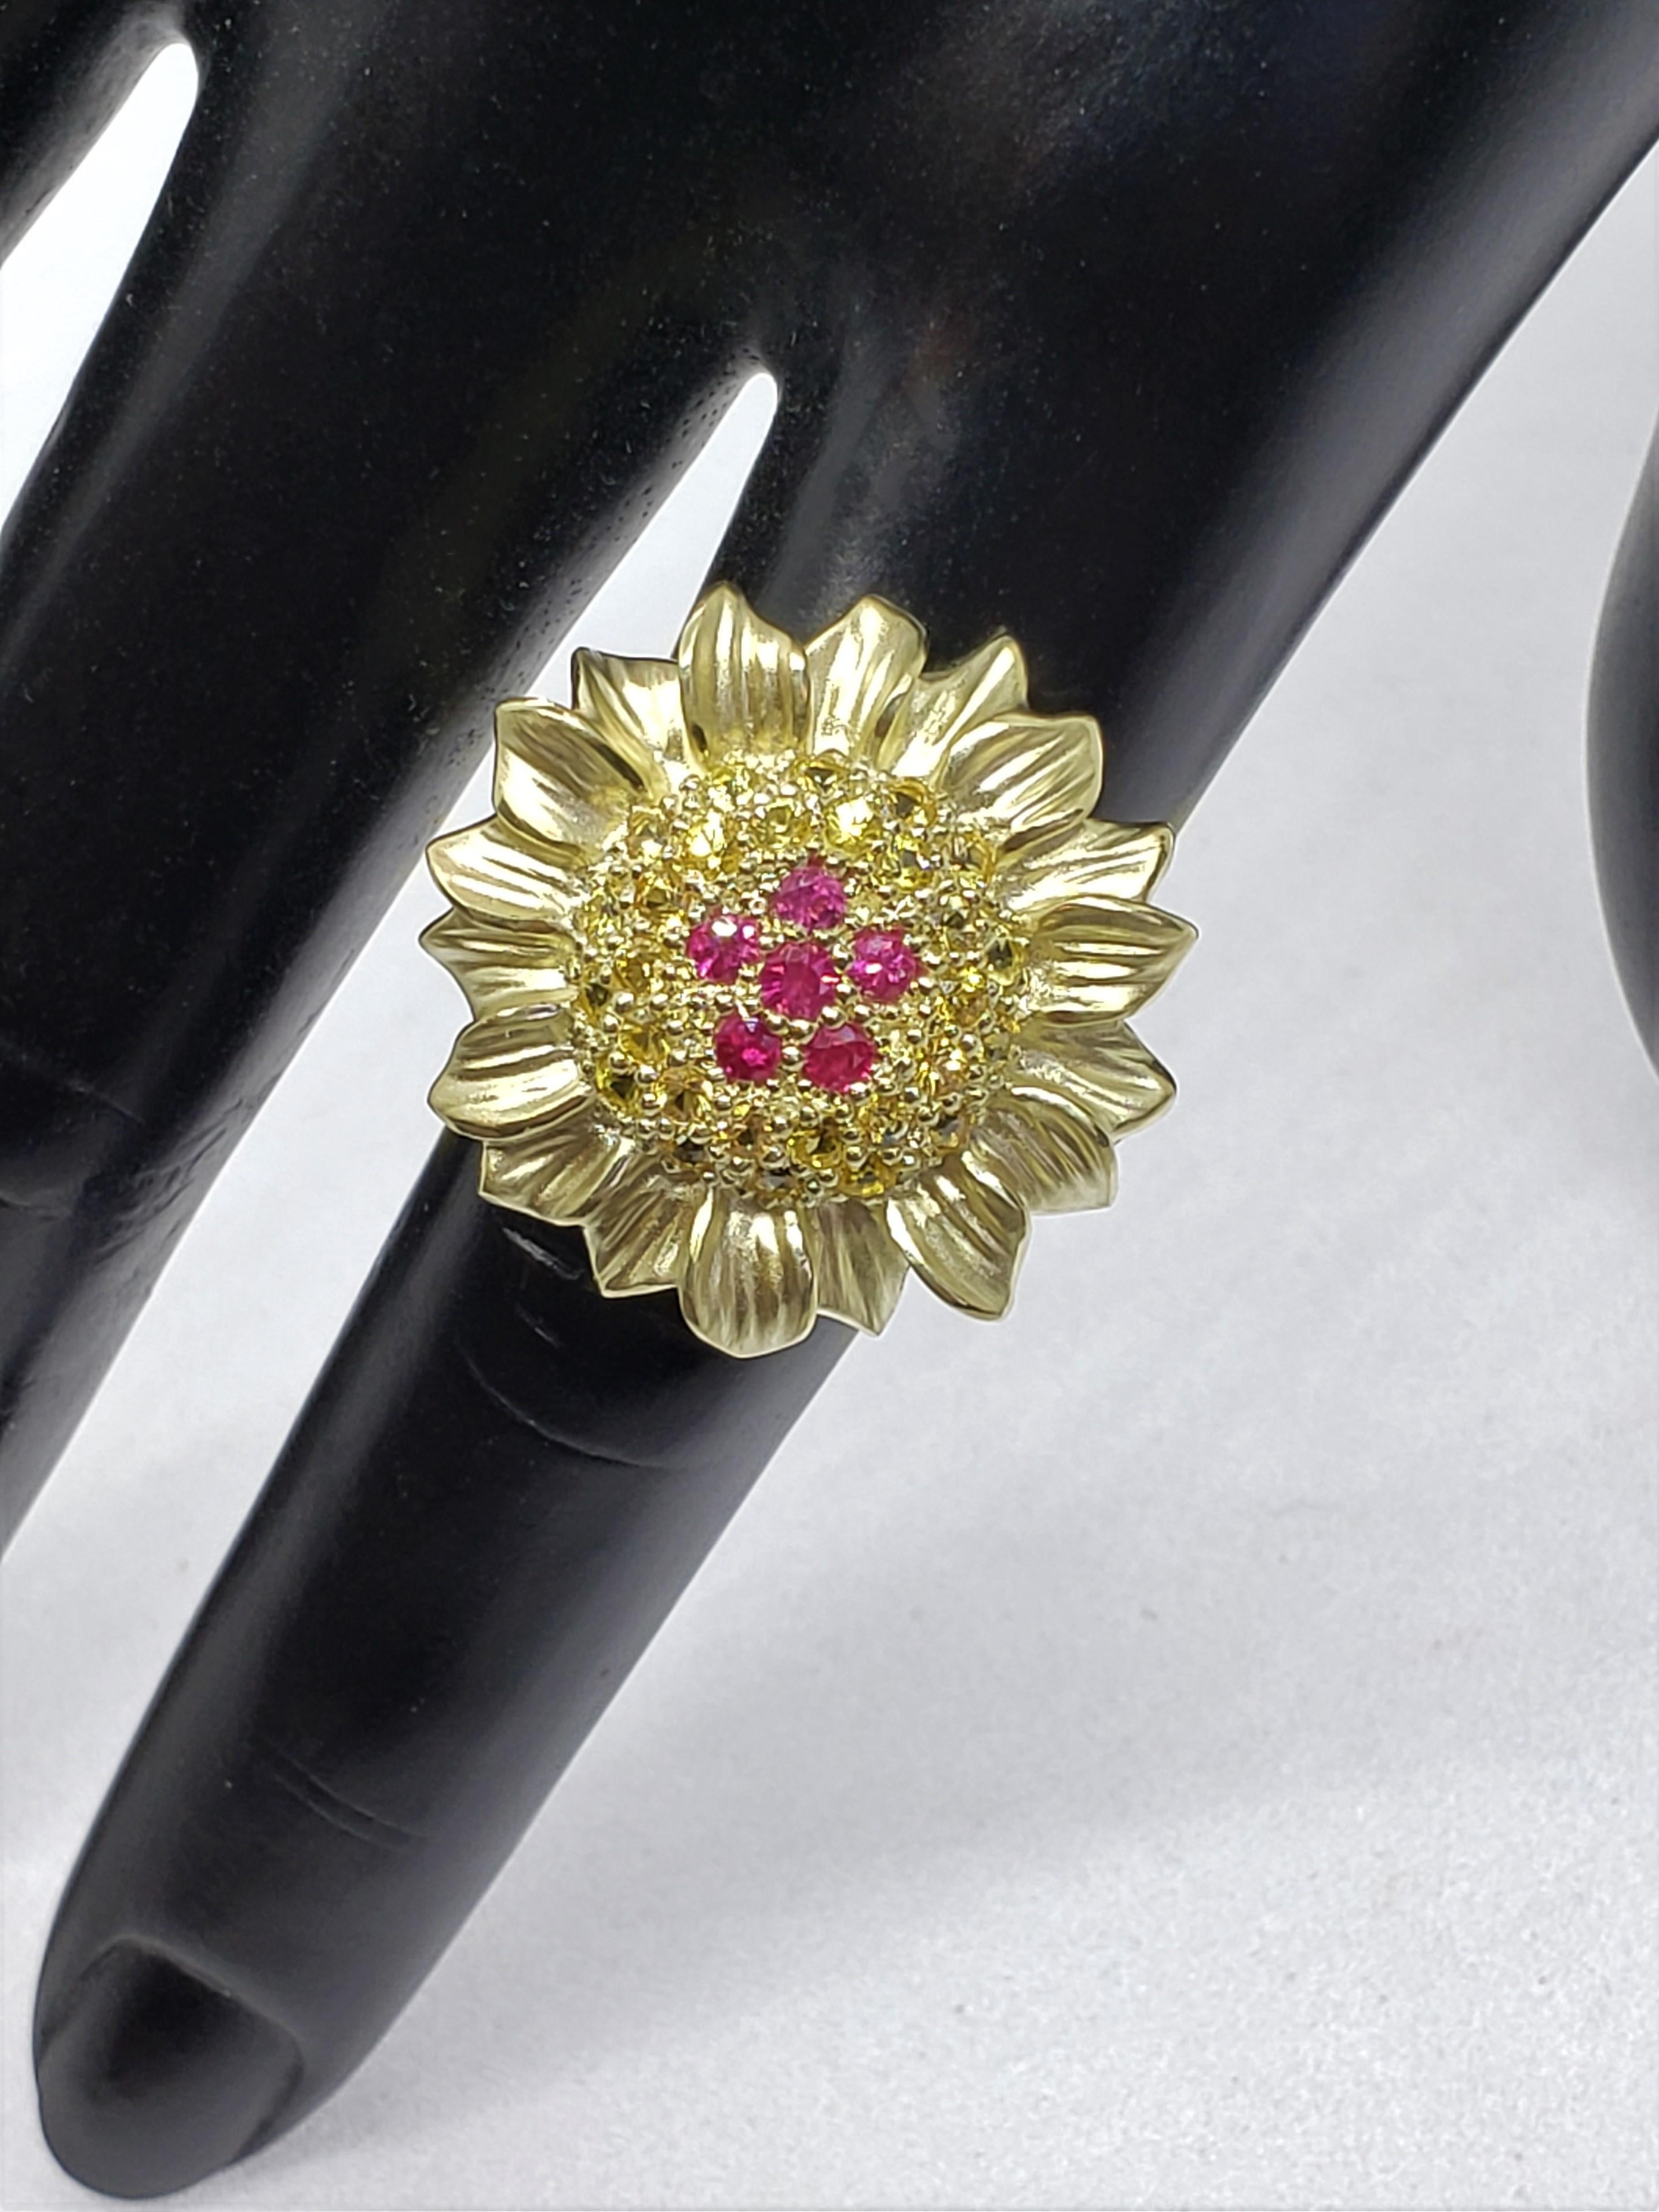 Contemporary By Popular Demand, Medium Sunflower Ring in 14K Gold and Ruby and Sapphire For Sale